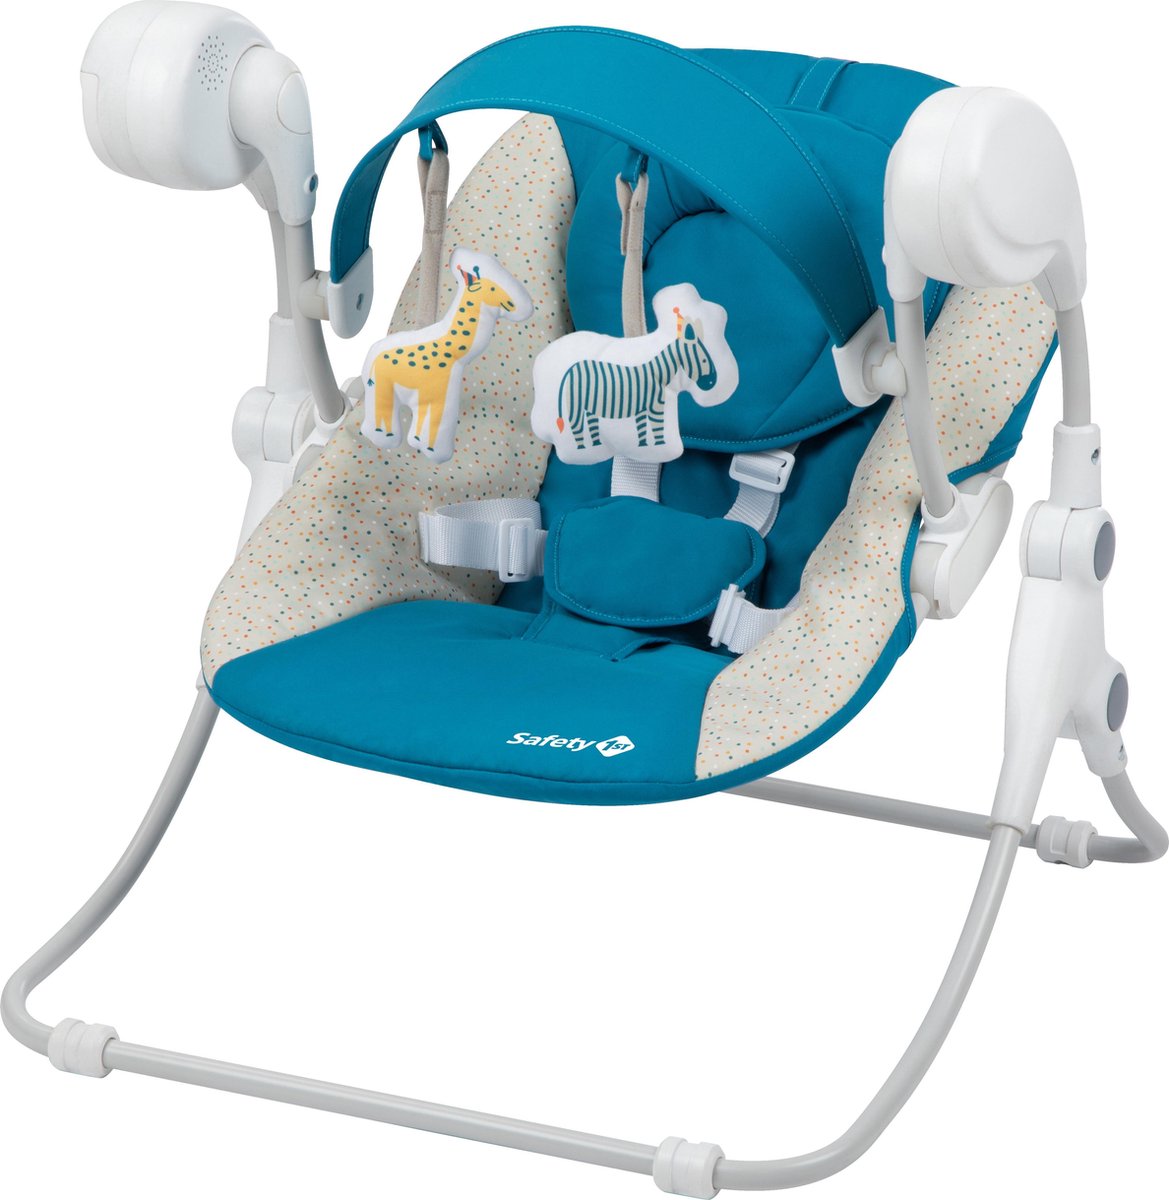 Safety 1st Alceo 2 in 1 Swing Bouncer - Happy Day